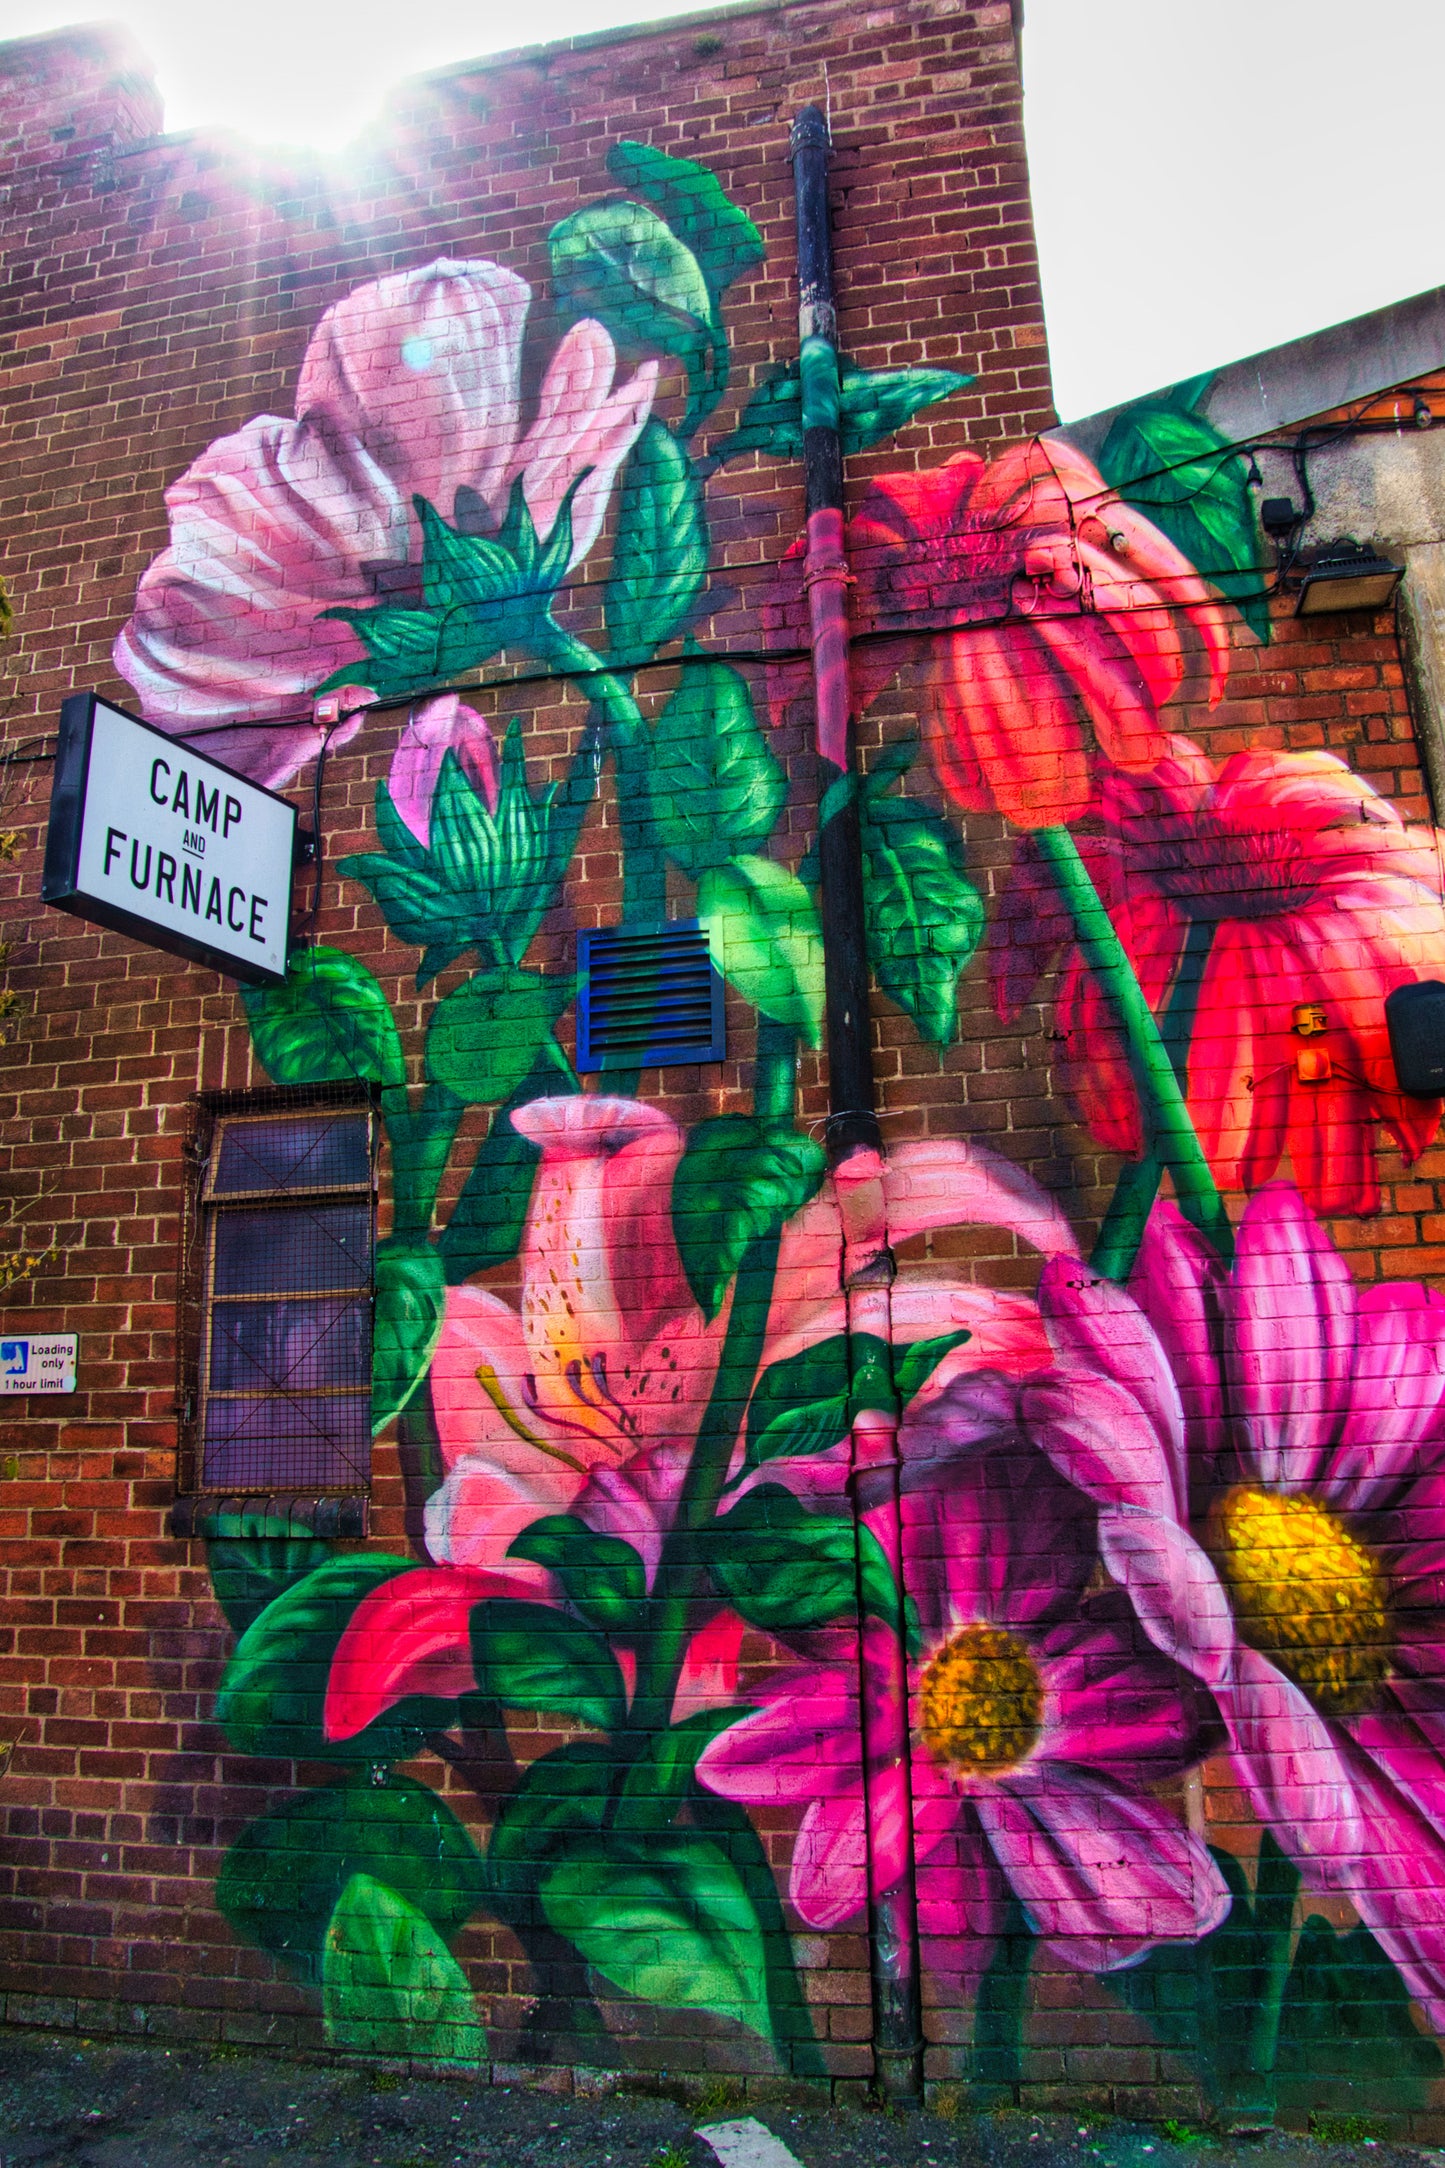 Liverpool Baltic Triangle Photo and Images -Liverpool Graffiti - Camp and Furnace - PTI07387 - Photo by Photographer Martin Fisher - Picture The Image